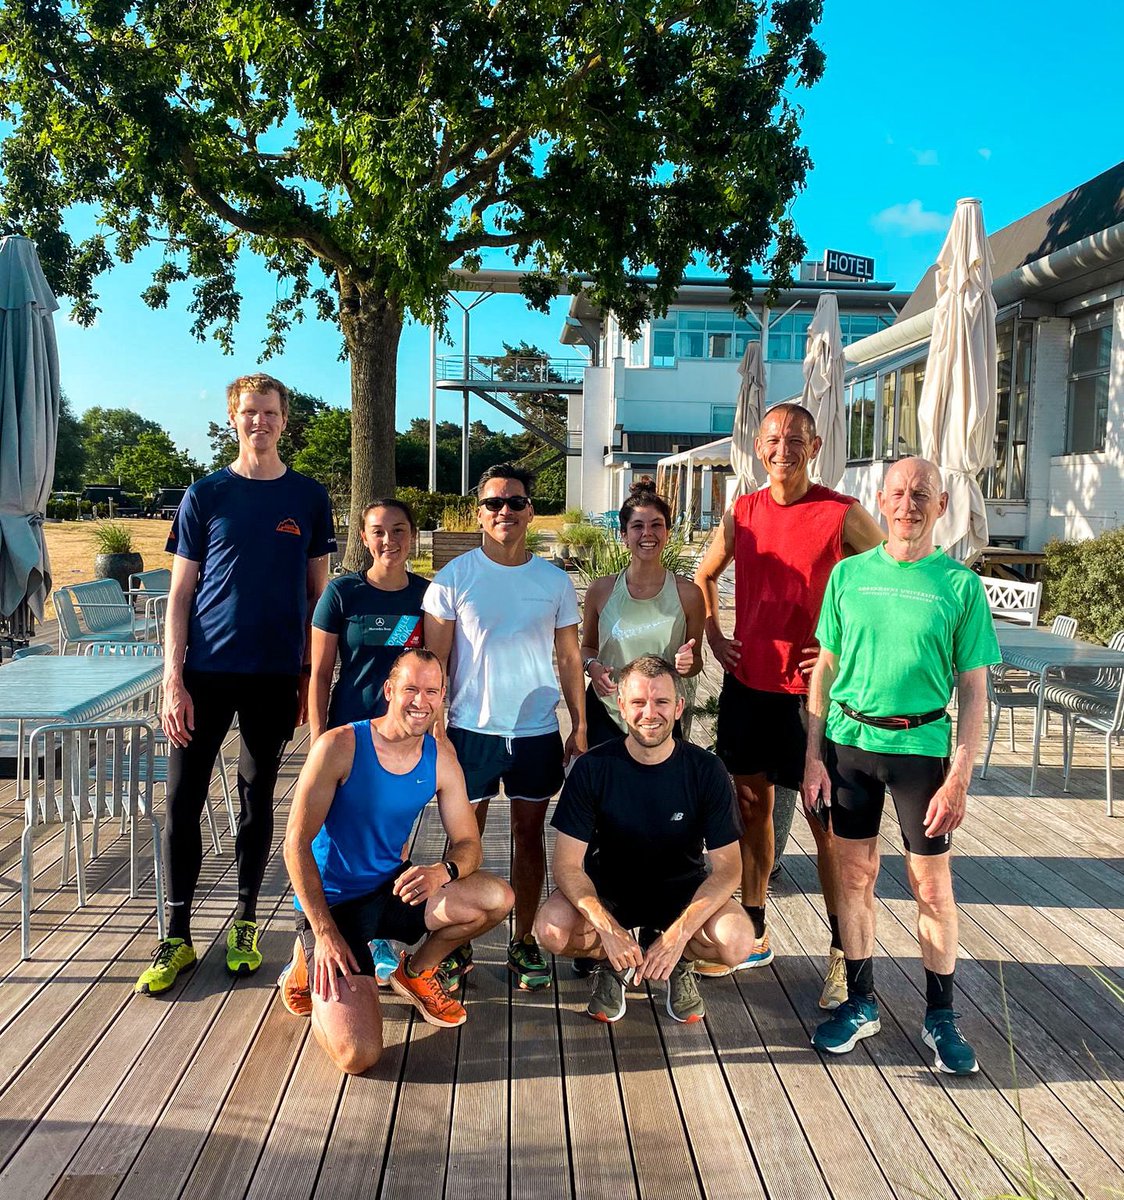 🏃‍♀️🏃‍♂️ rise and shine! We kicked off the third day of the course #MuscleCPH2023 by running with the professors @proferikrichter @tejensen23 💥 @kwickham9 @MuscleBiology @RasmusKjobsted